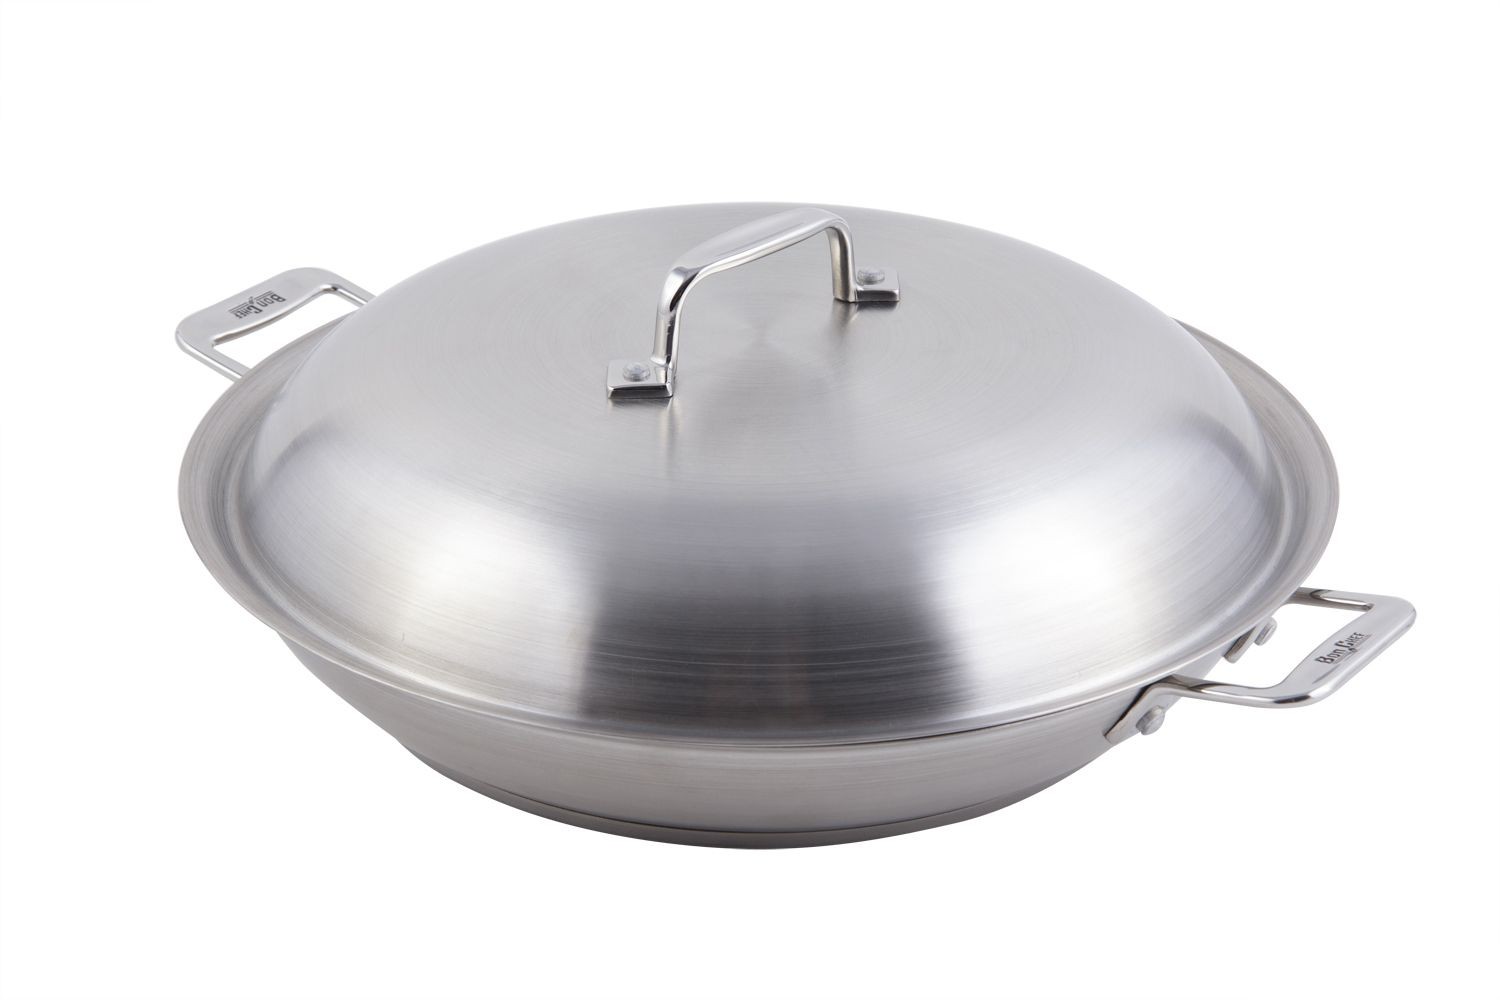 Bon Chef 60006 Cucina Stainless Steel Braiser Pan with Lid, 3 1/2 Qt.